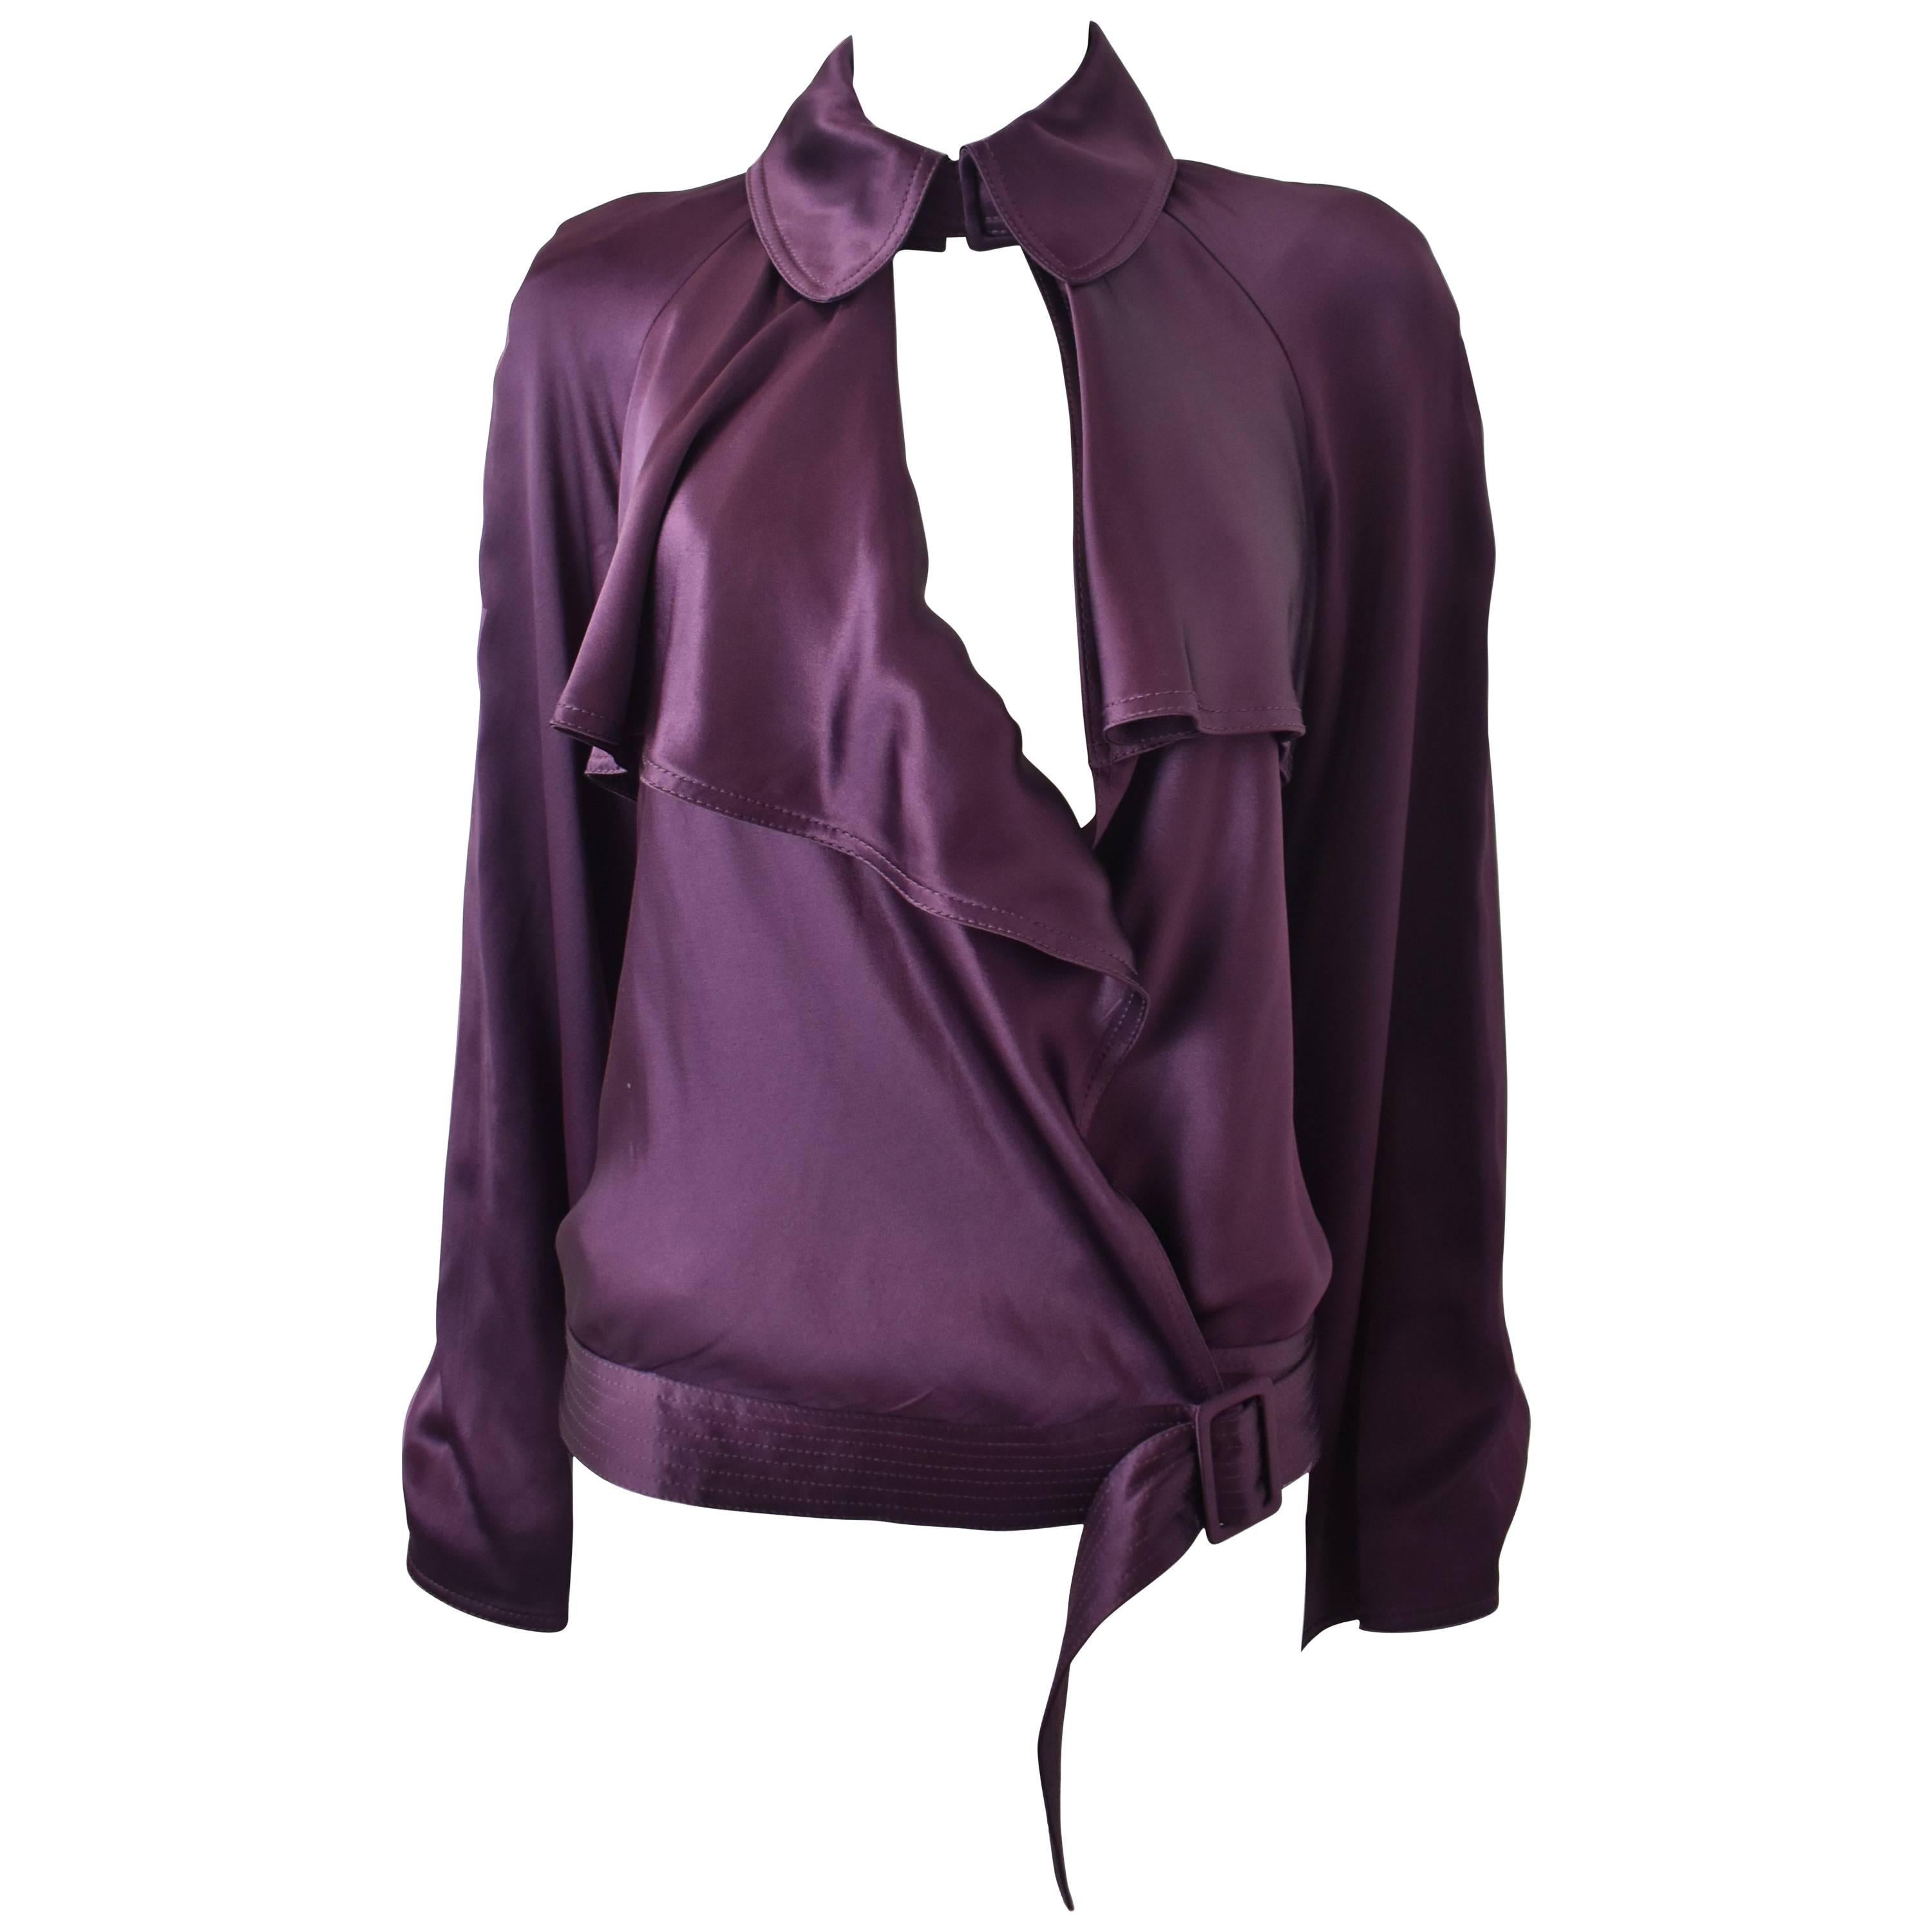  Gaultier Purple Ruffle Wrap-around Top with Bell Sleeves and Collar